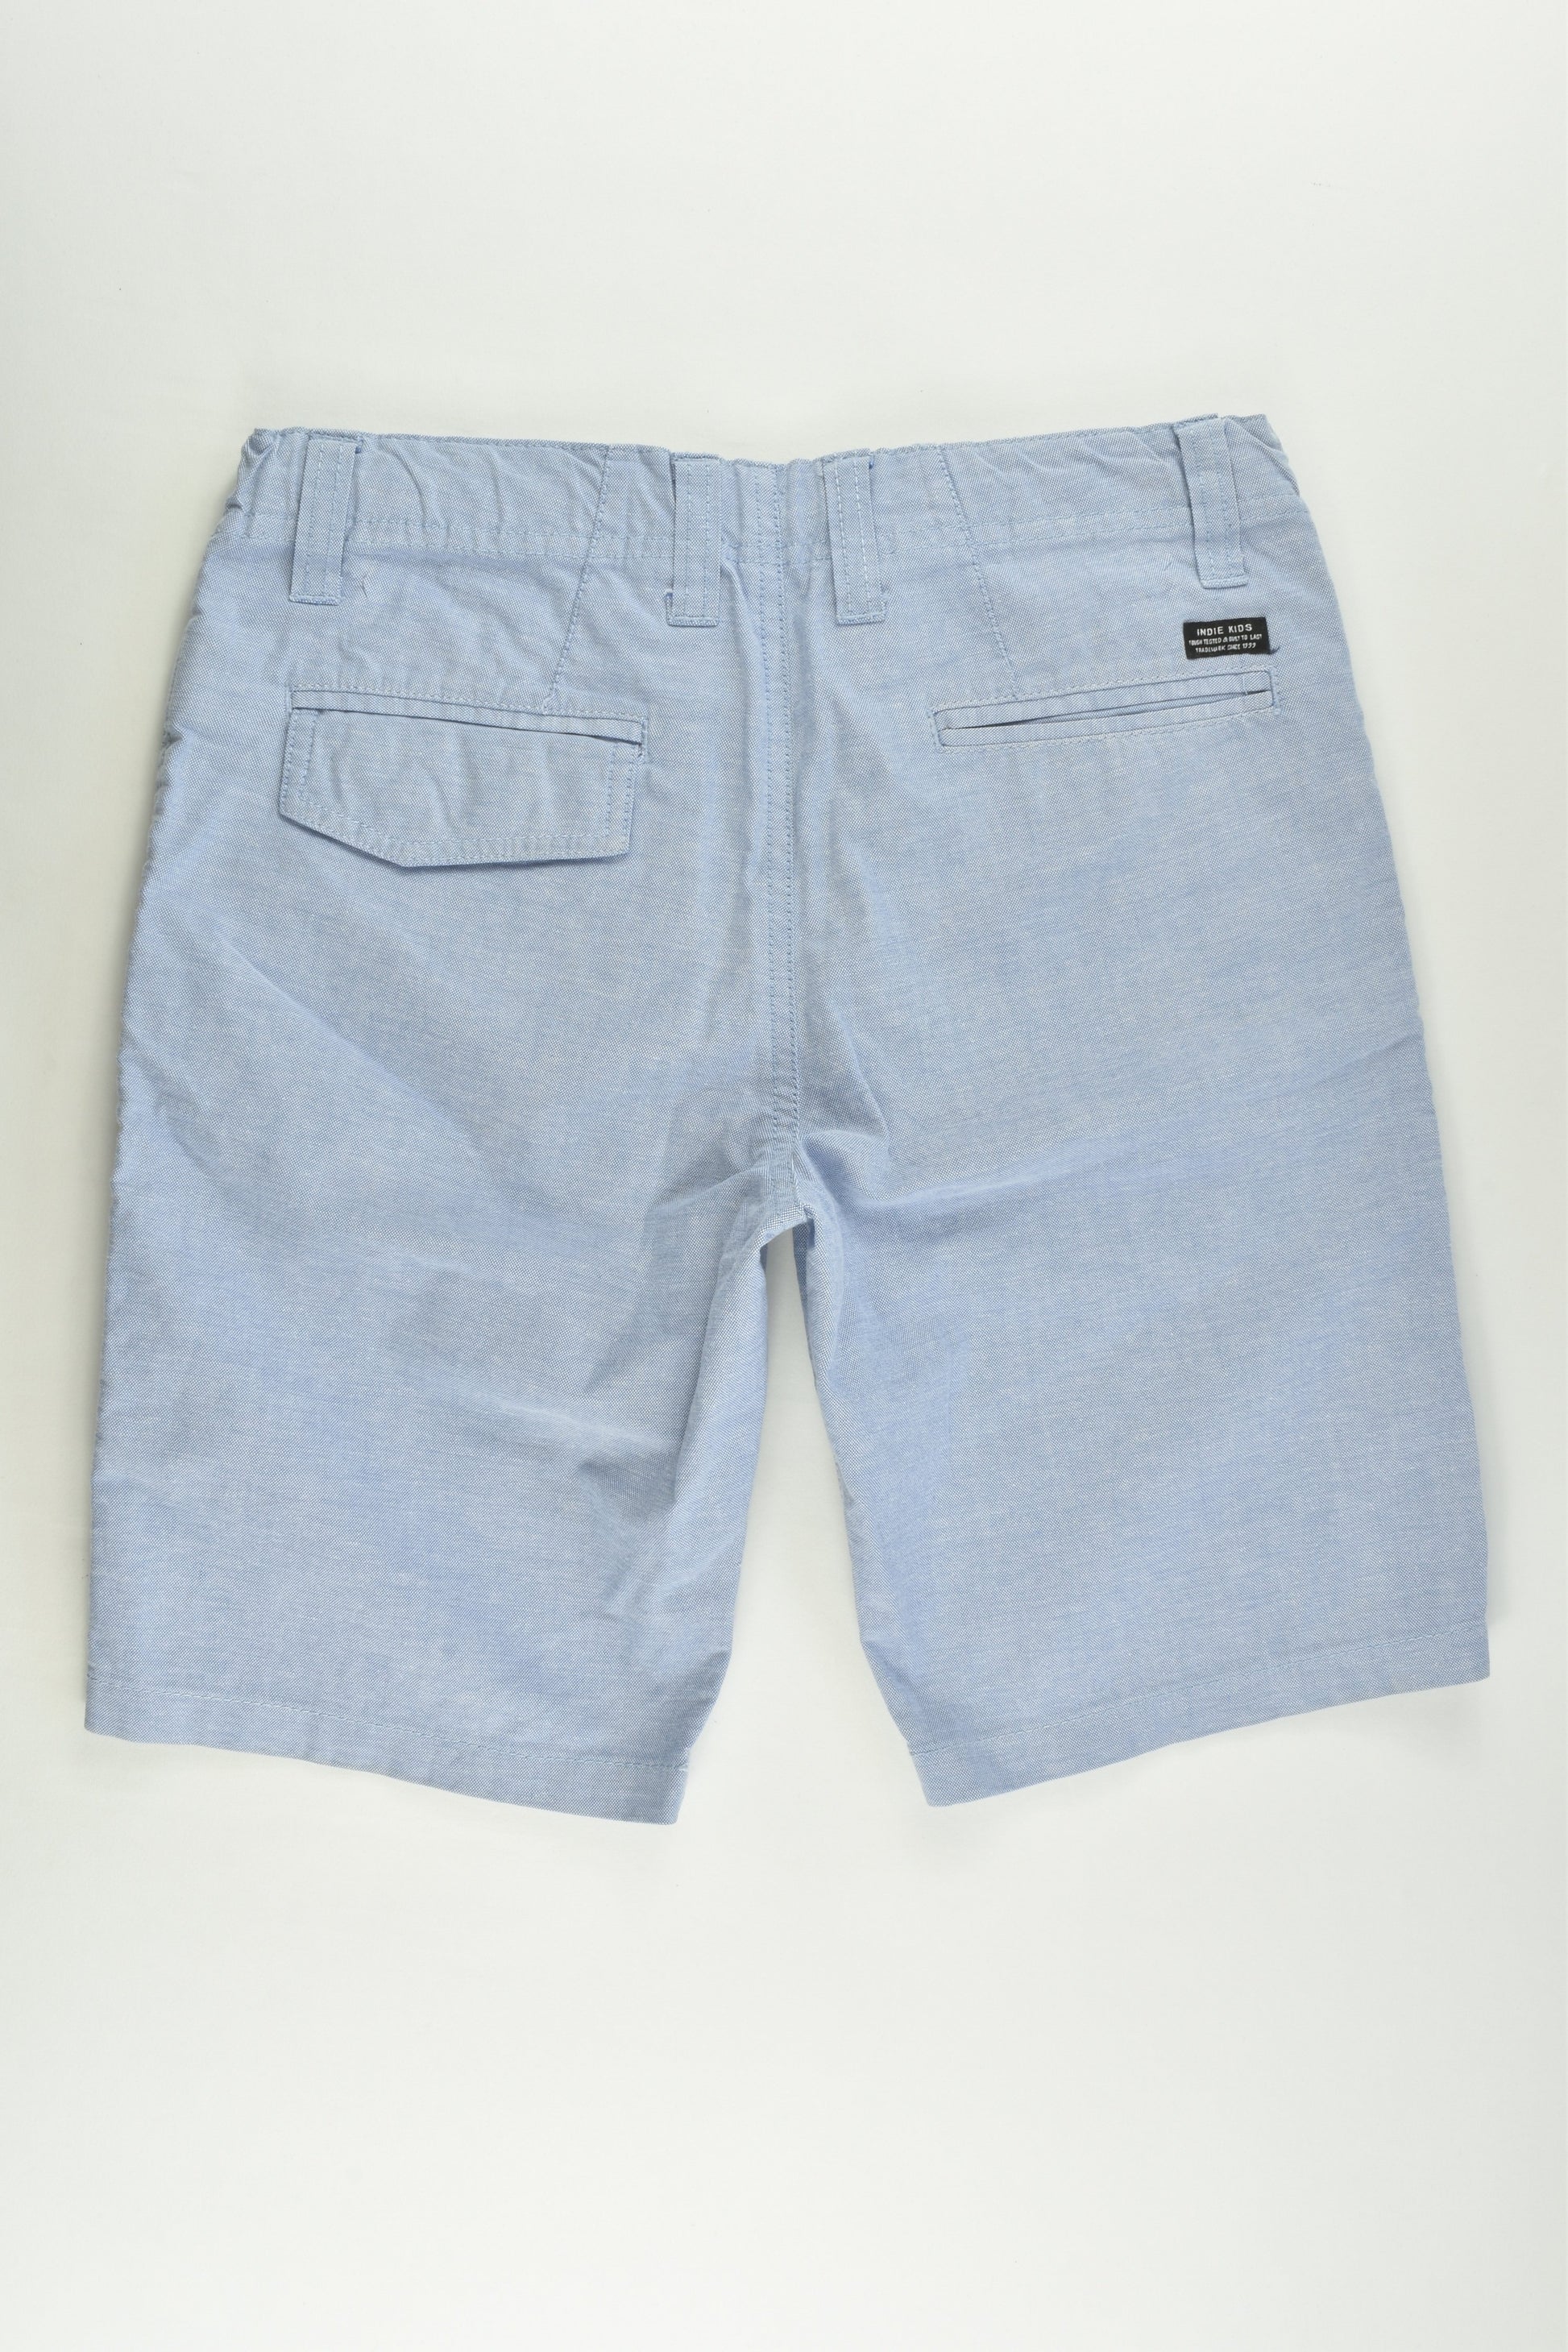 Indie & Co Size 10 Shorts